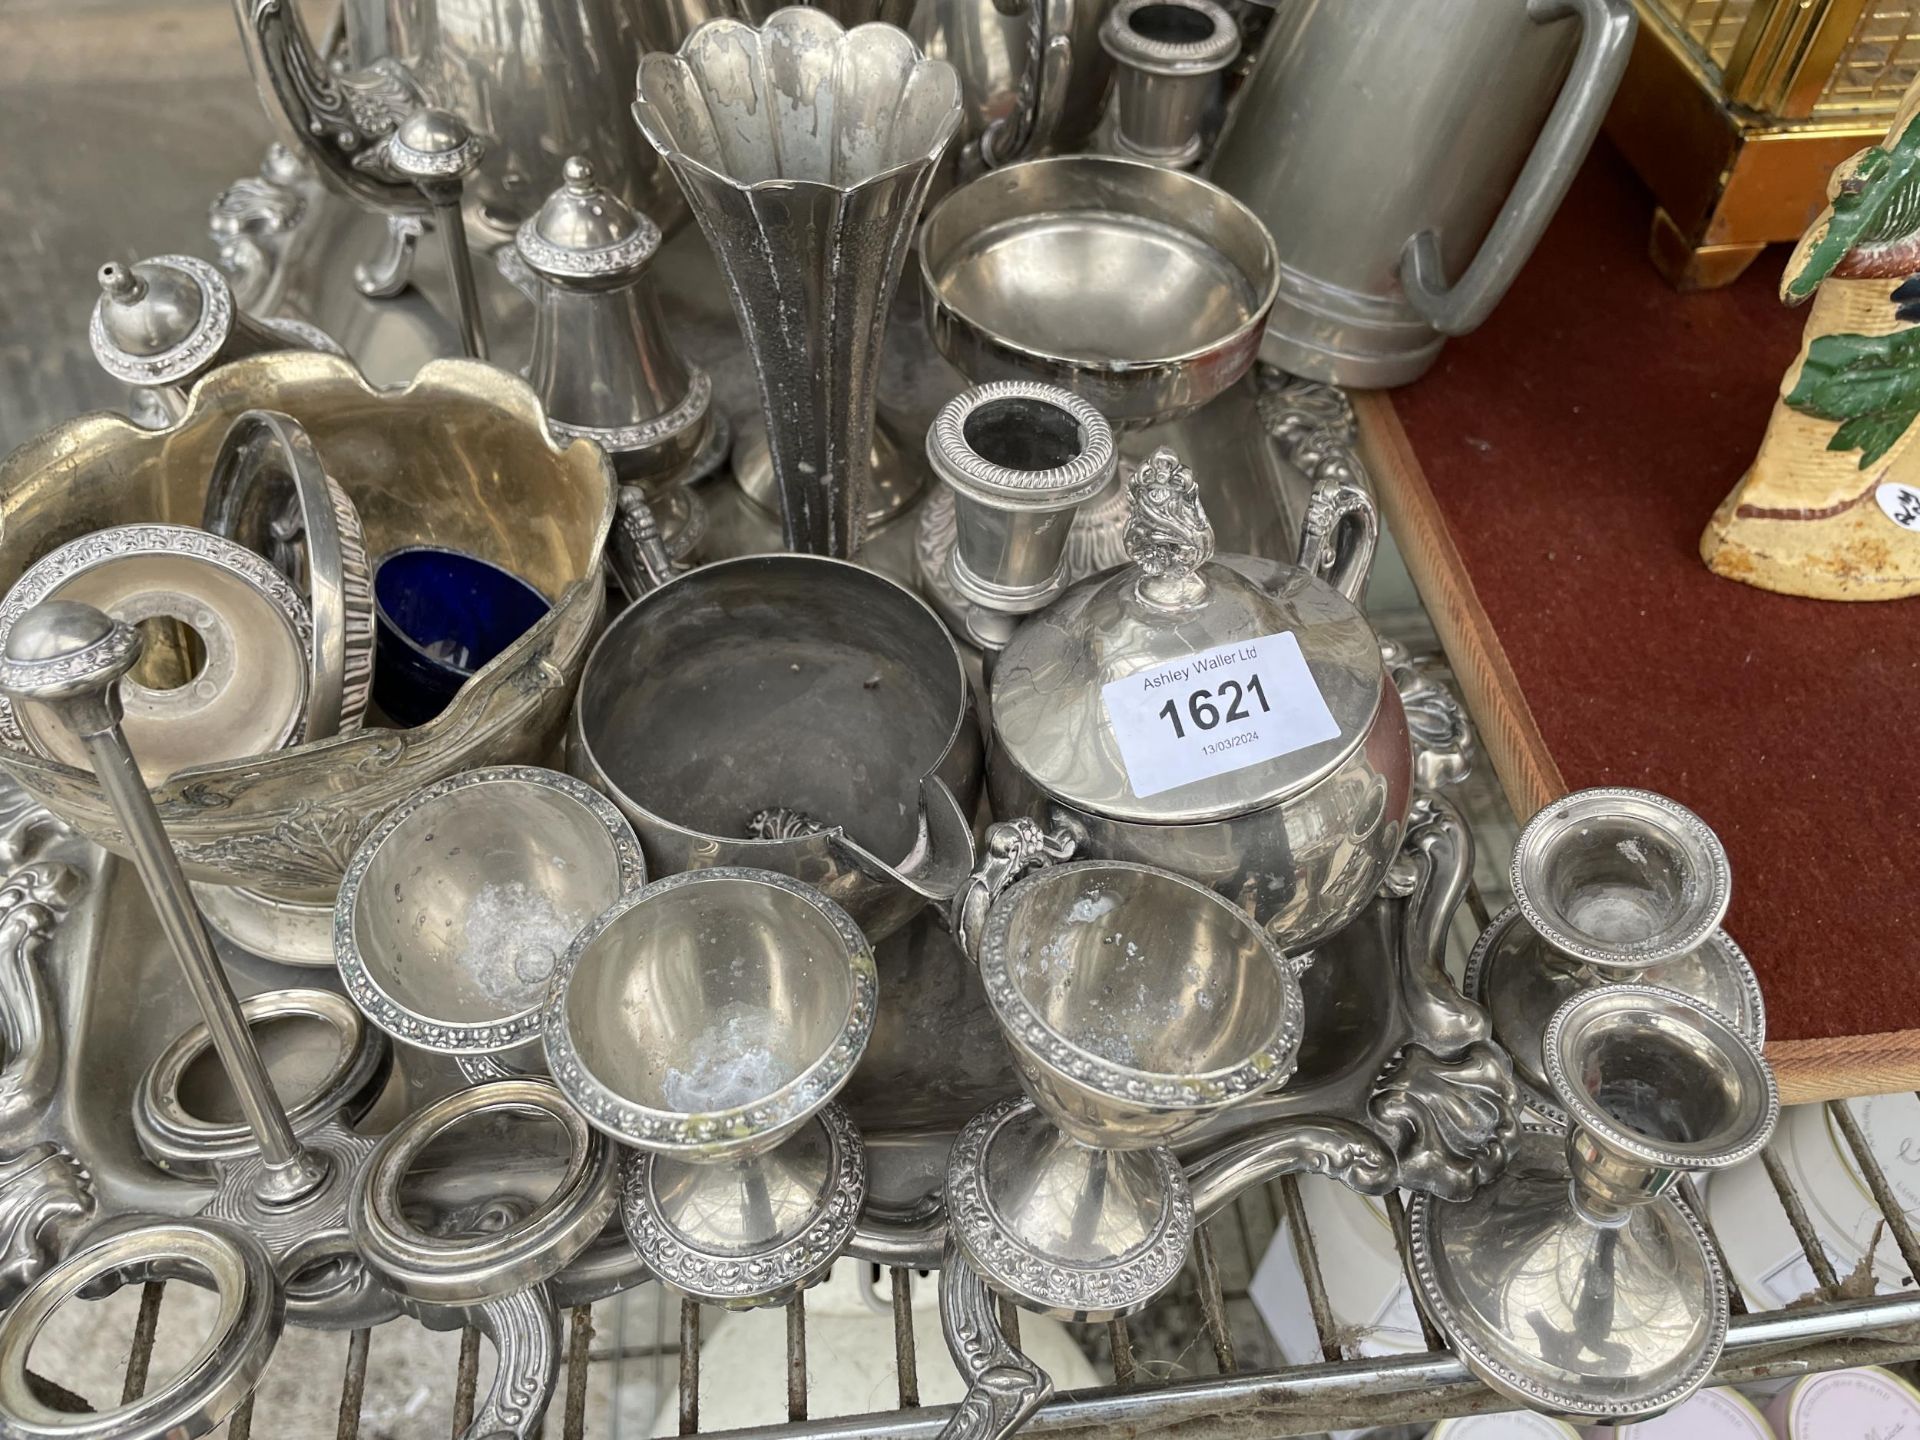 A LARGE ASSORTMENT OF SILVER PLATED ITEMS TO INCLUDE A TRAY, COFFEE POTS, CANDLE STICKS AND EGG CUPS - Image 2 of 3